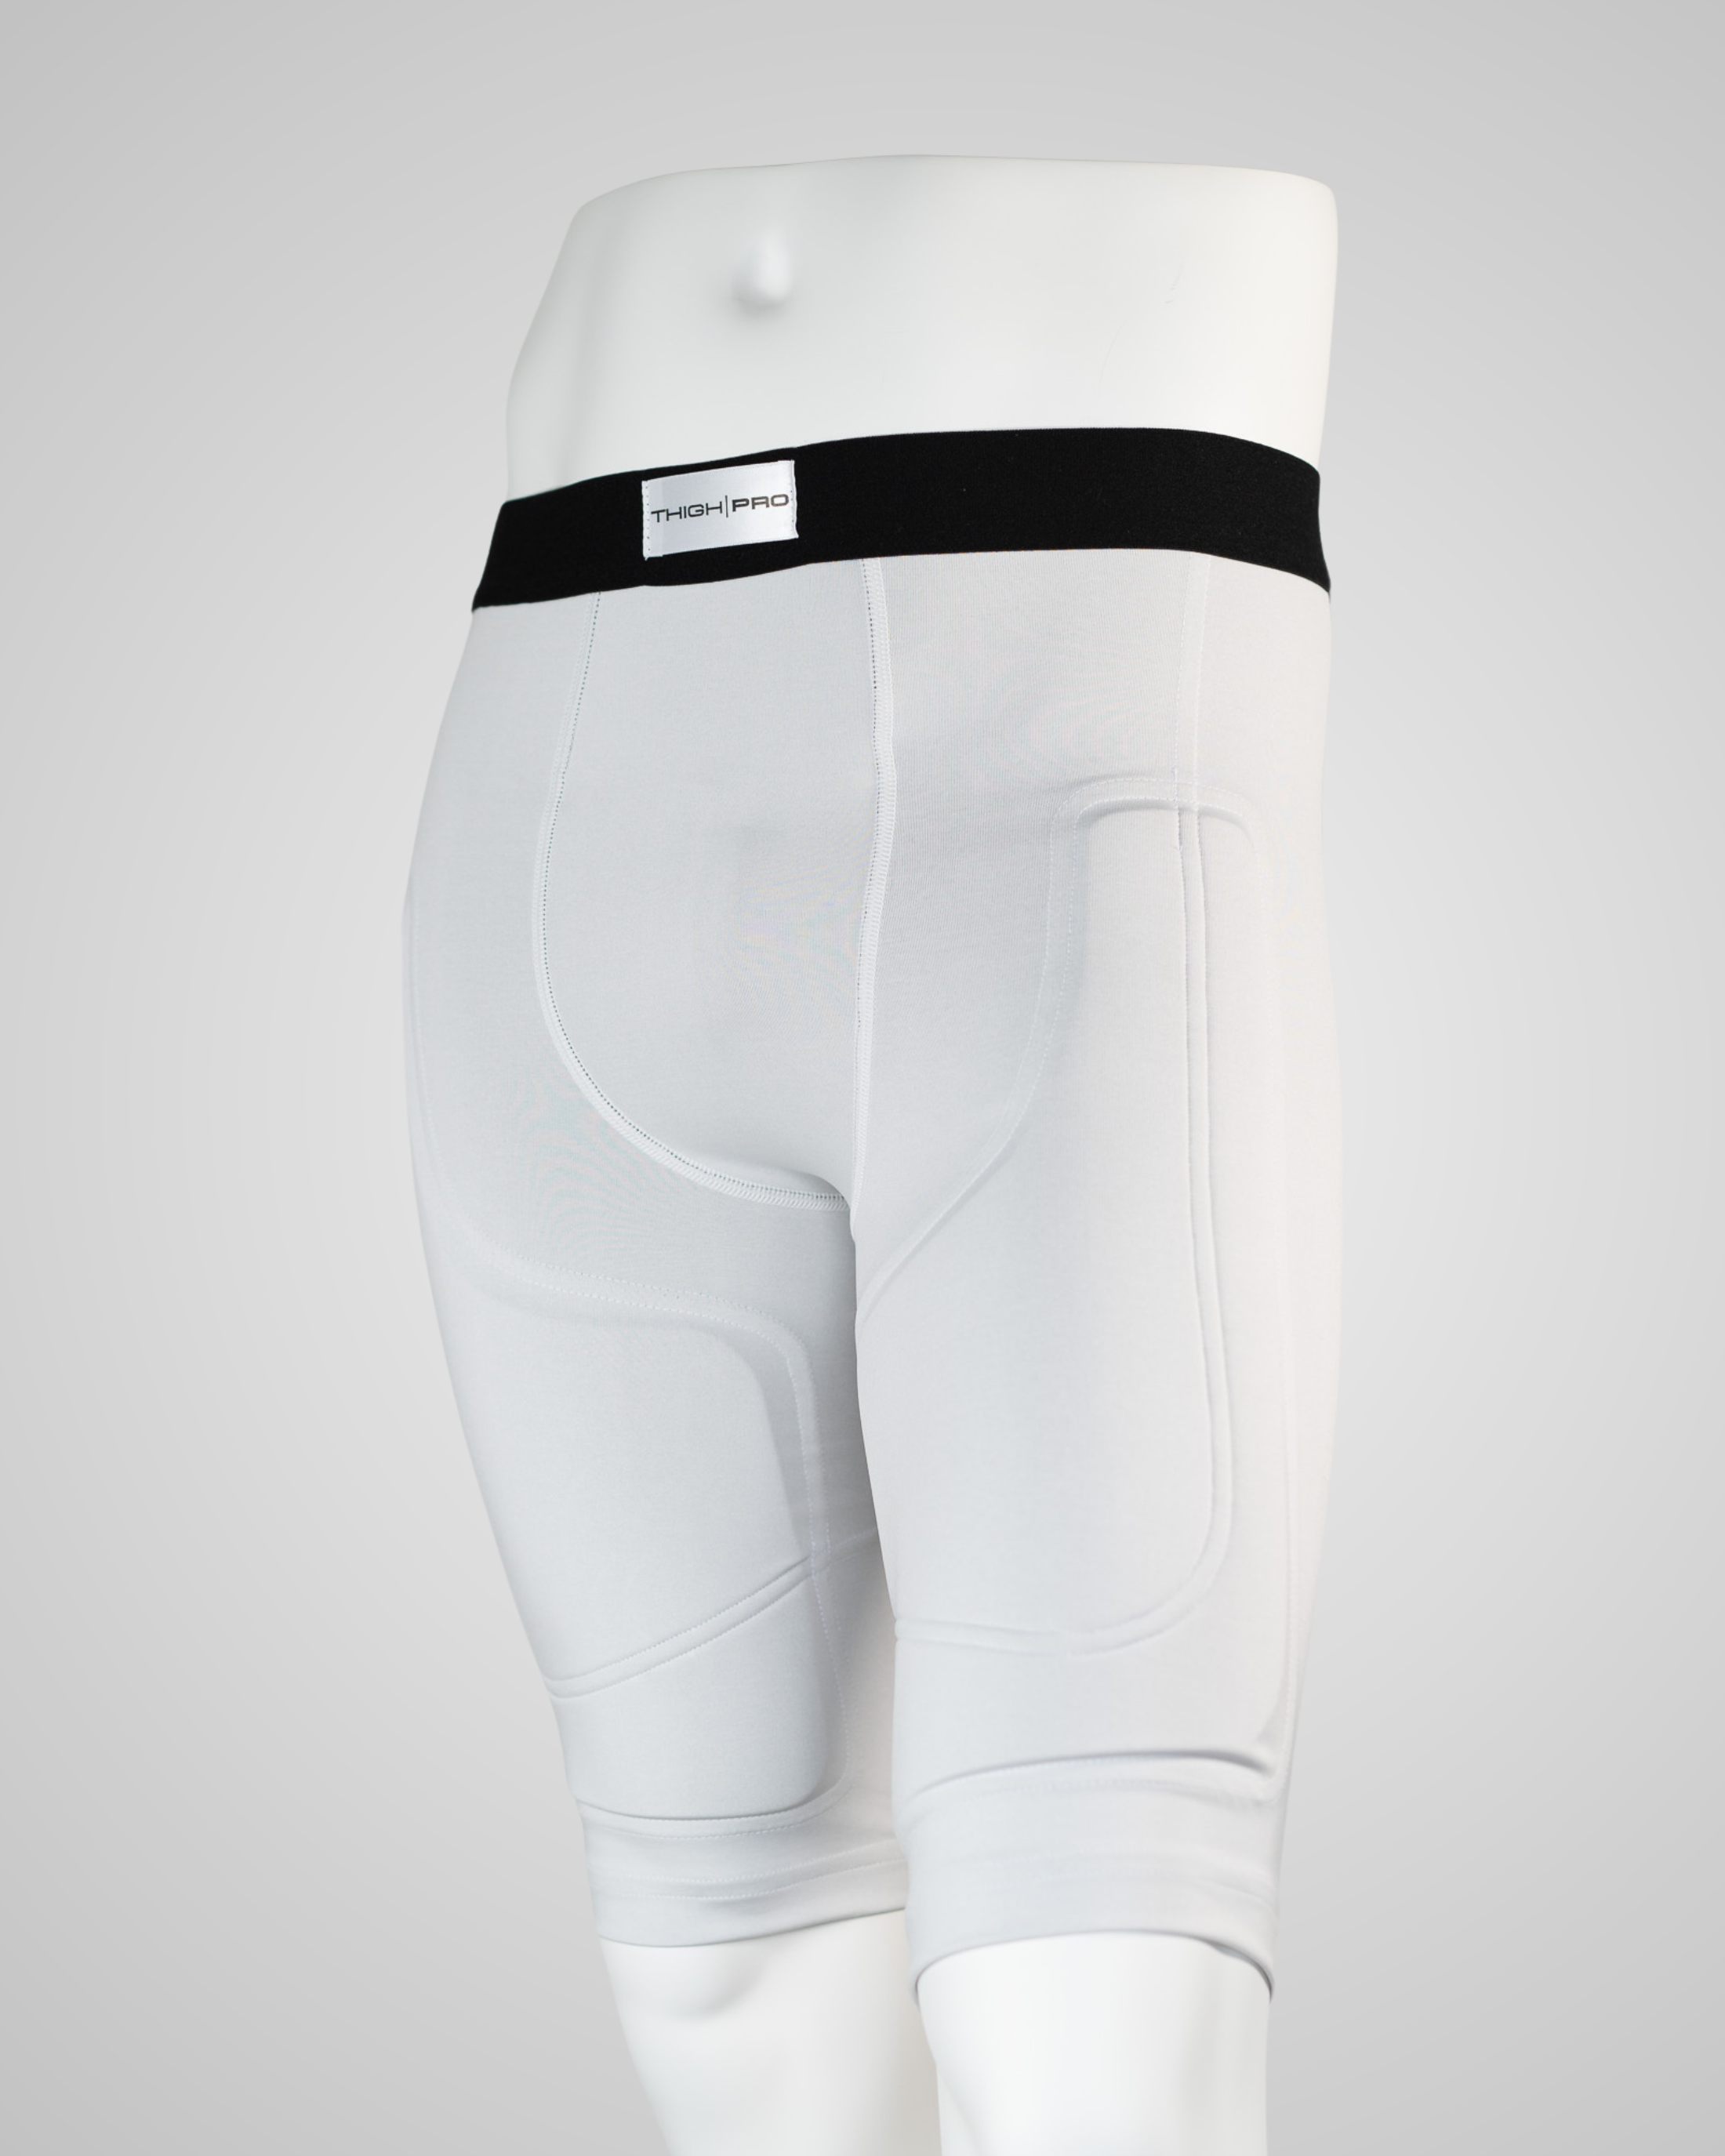 How to Put Pads in Football Pants 